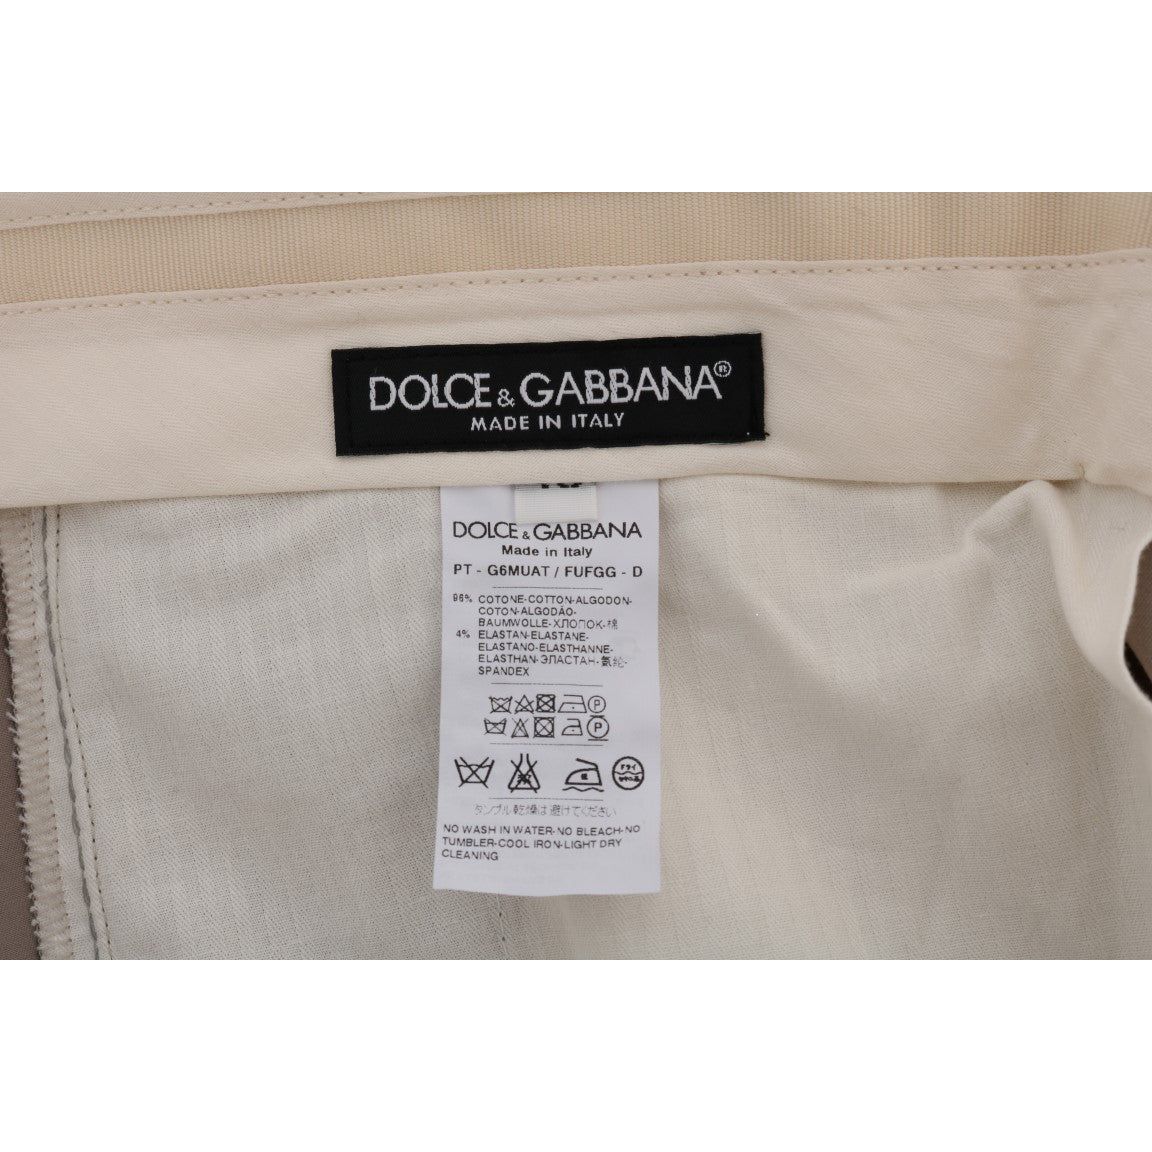 Dolce & Gabbana Chic Beige Chinos Casual Pants beige-cotton-stretch-chinos-pants Jeans & Pants 447481-beige-cotton-stretch-chinos-pants-3-5.jpg